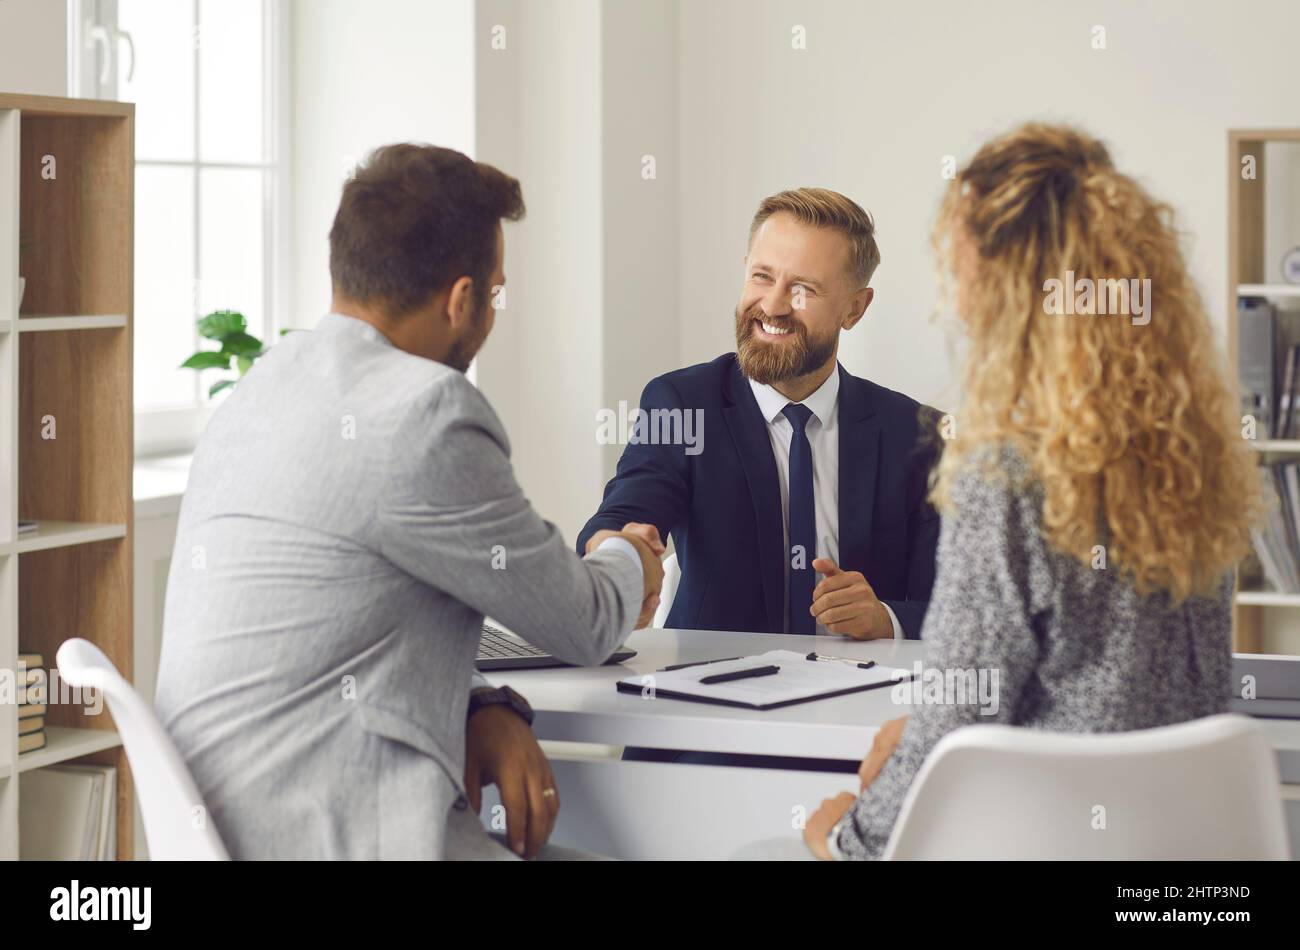 Friendly lawyer, realtor or financial advisor shakes hands with his clients to young couple. Stock Photo